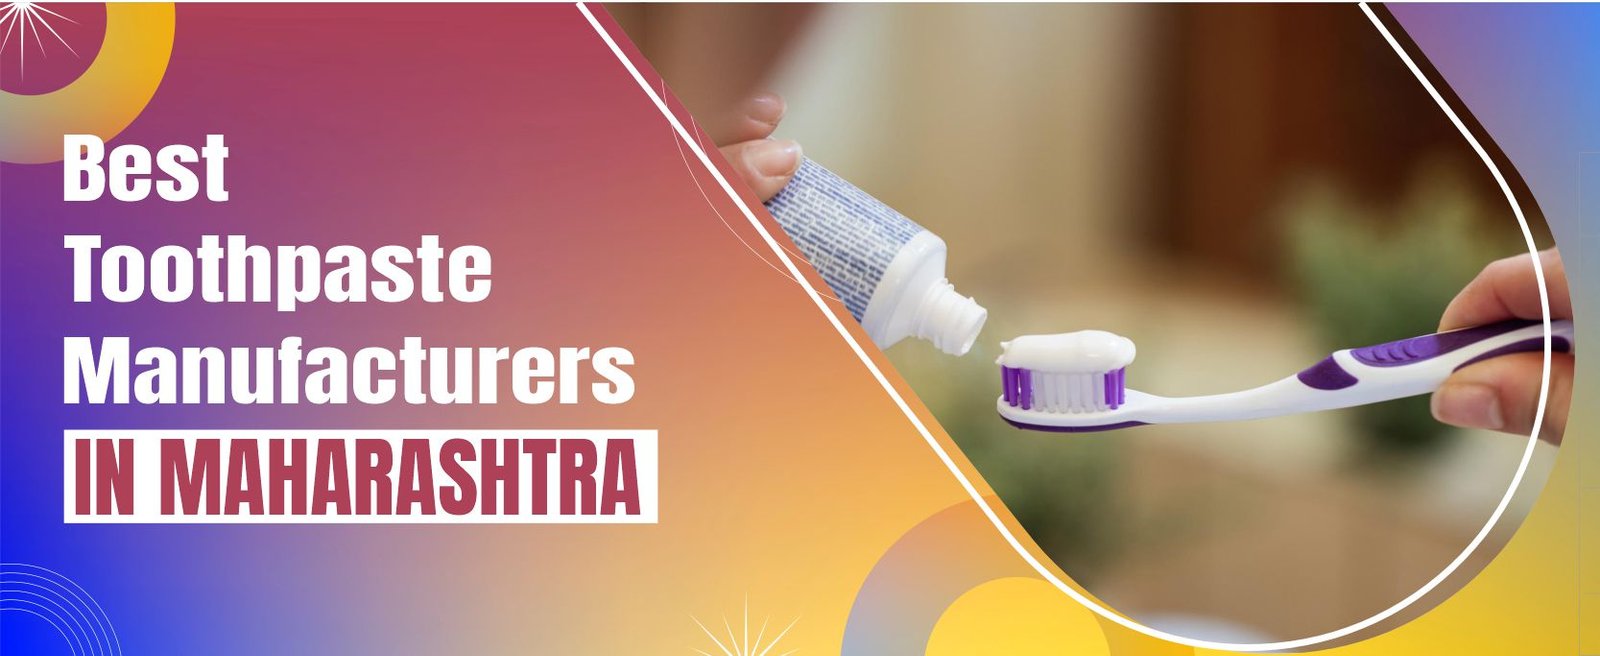 Toothpaste Manufacturers In Maharashtra